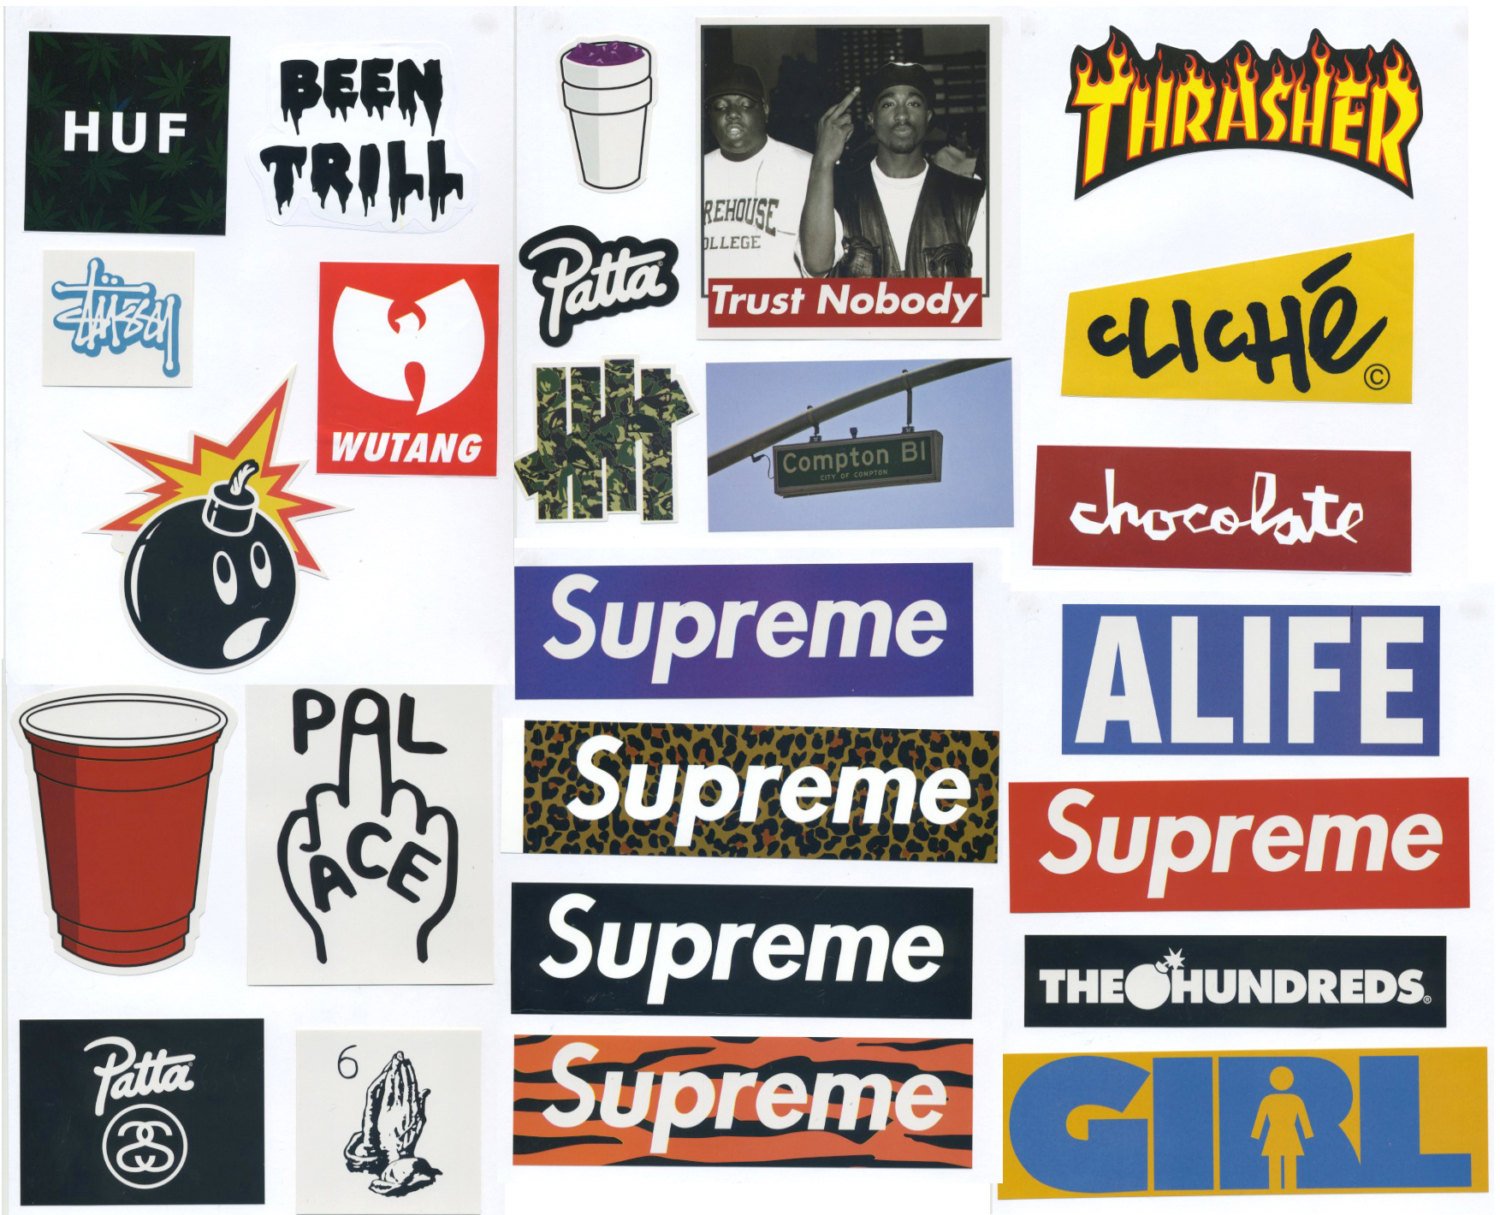 Will ship ASAP $10 each pack of 4 Supreme sticker 4 pack